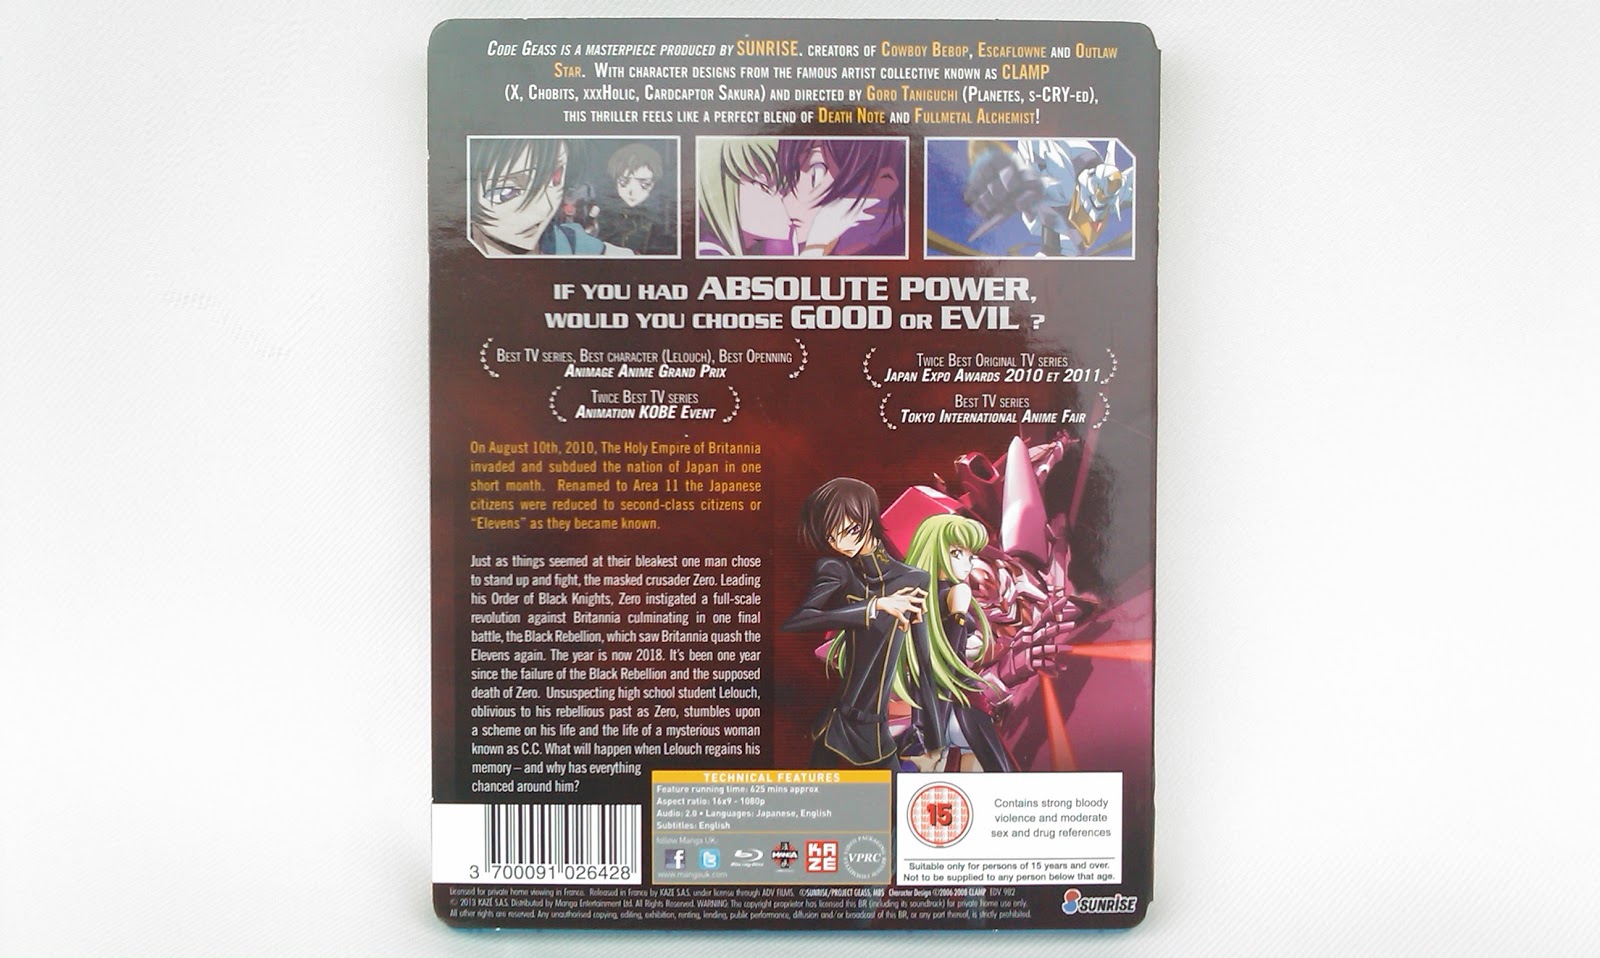 Code Geass Lelouch of the Rebellion R1 720p Dual Audio BD